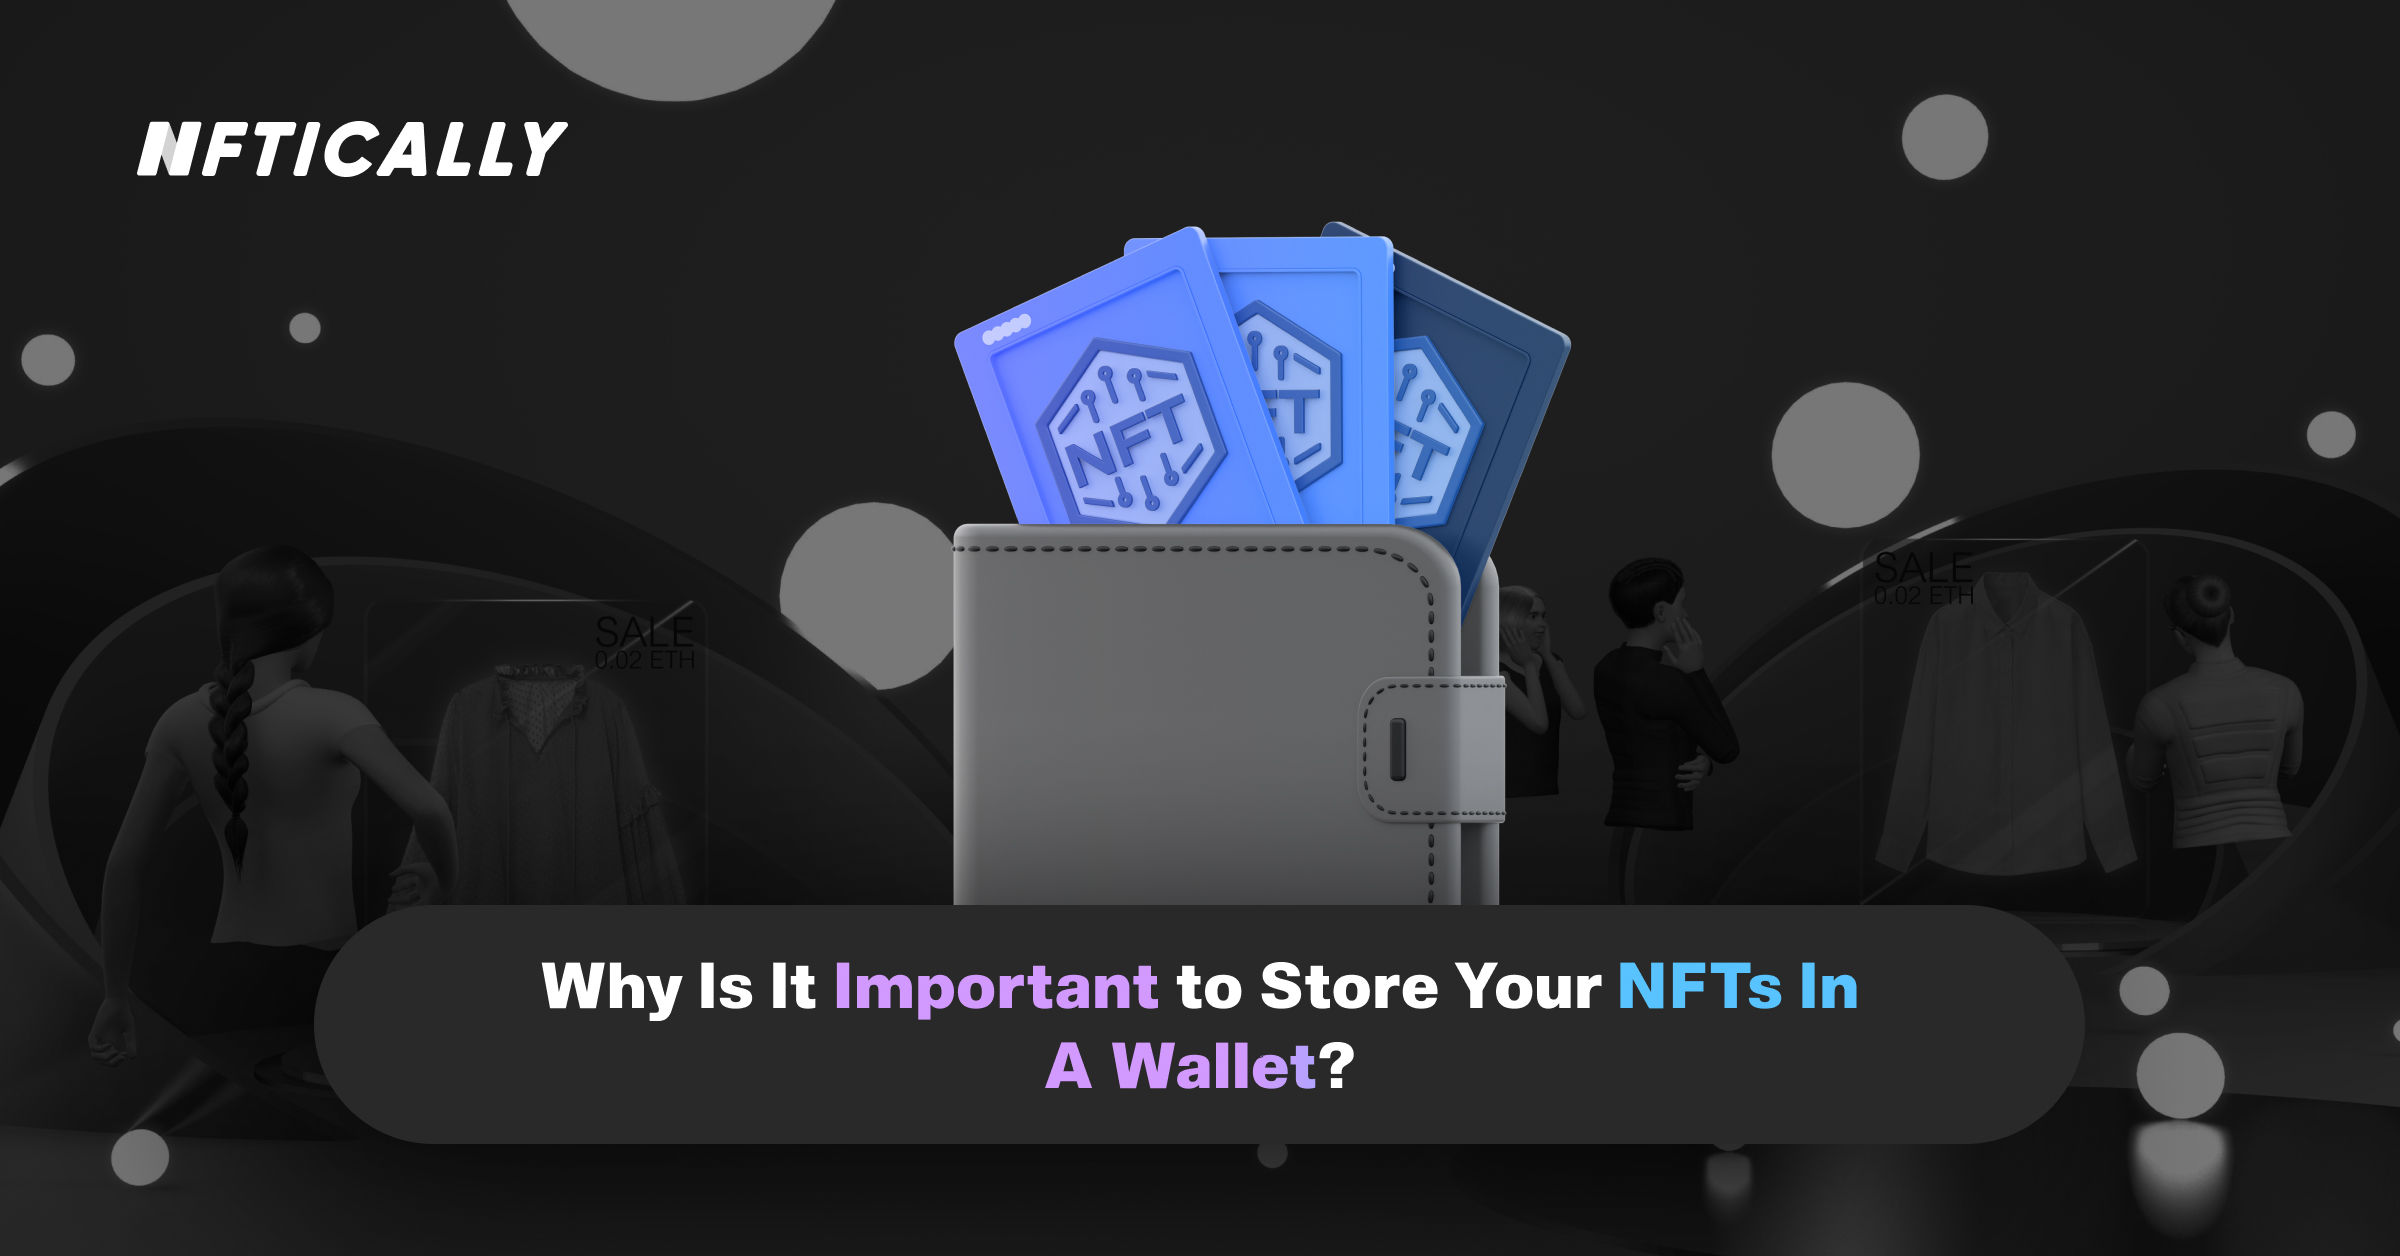 Why Is It Important to Store Your NFTs In A Wallet?